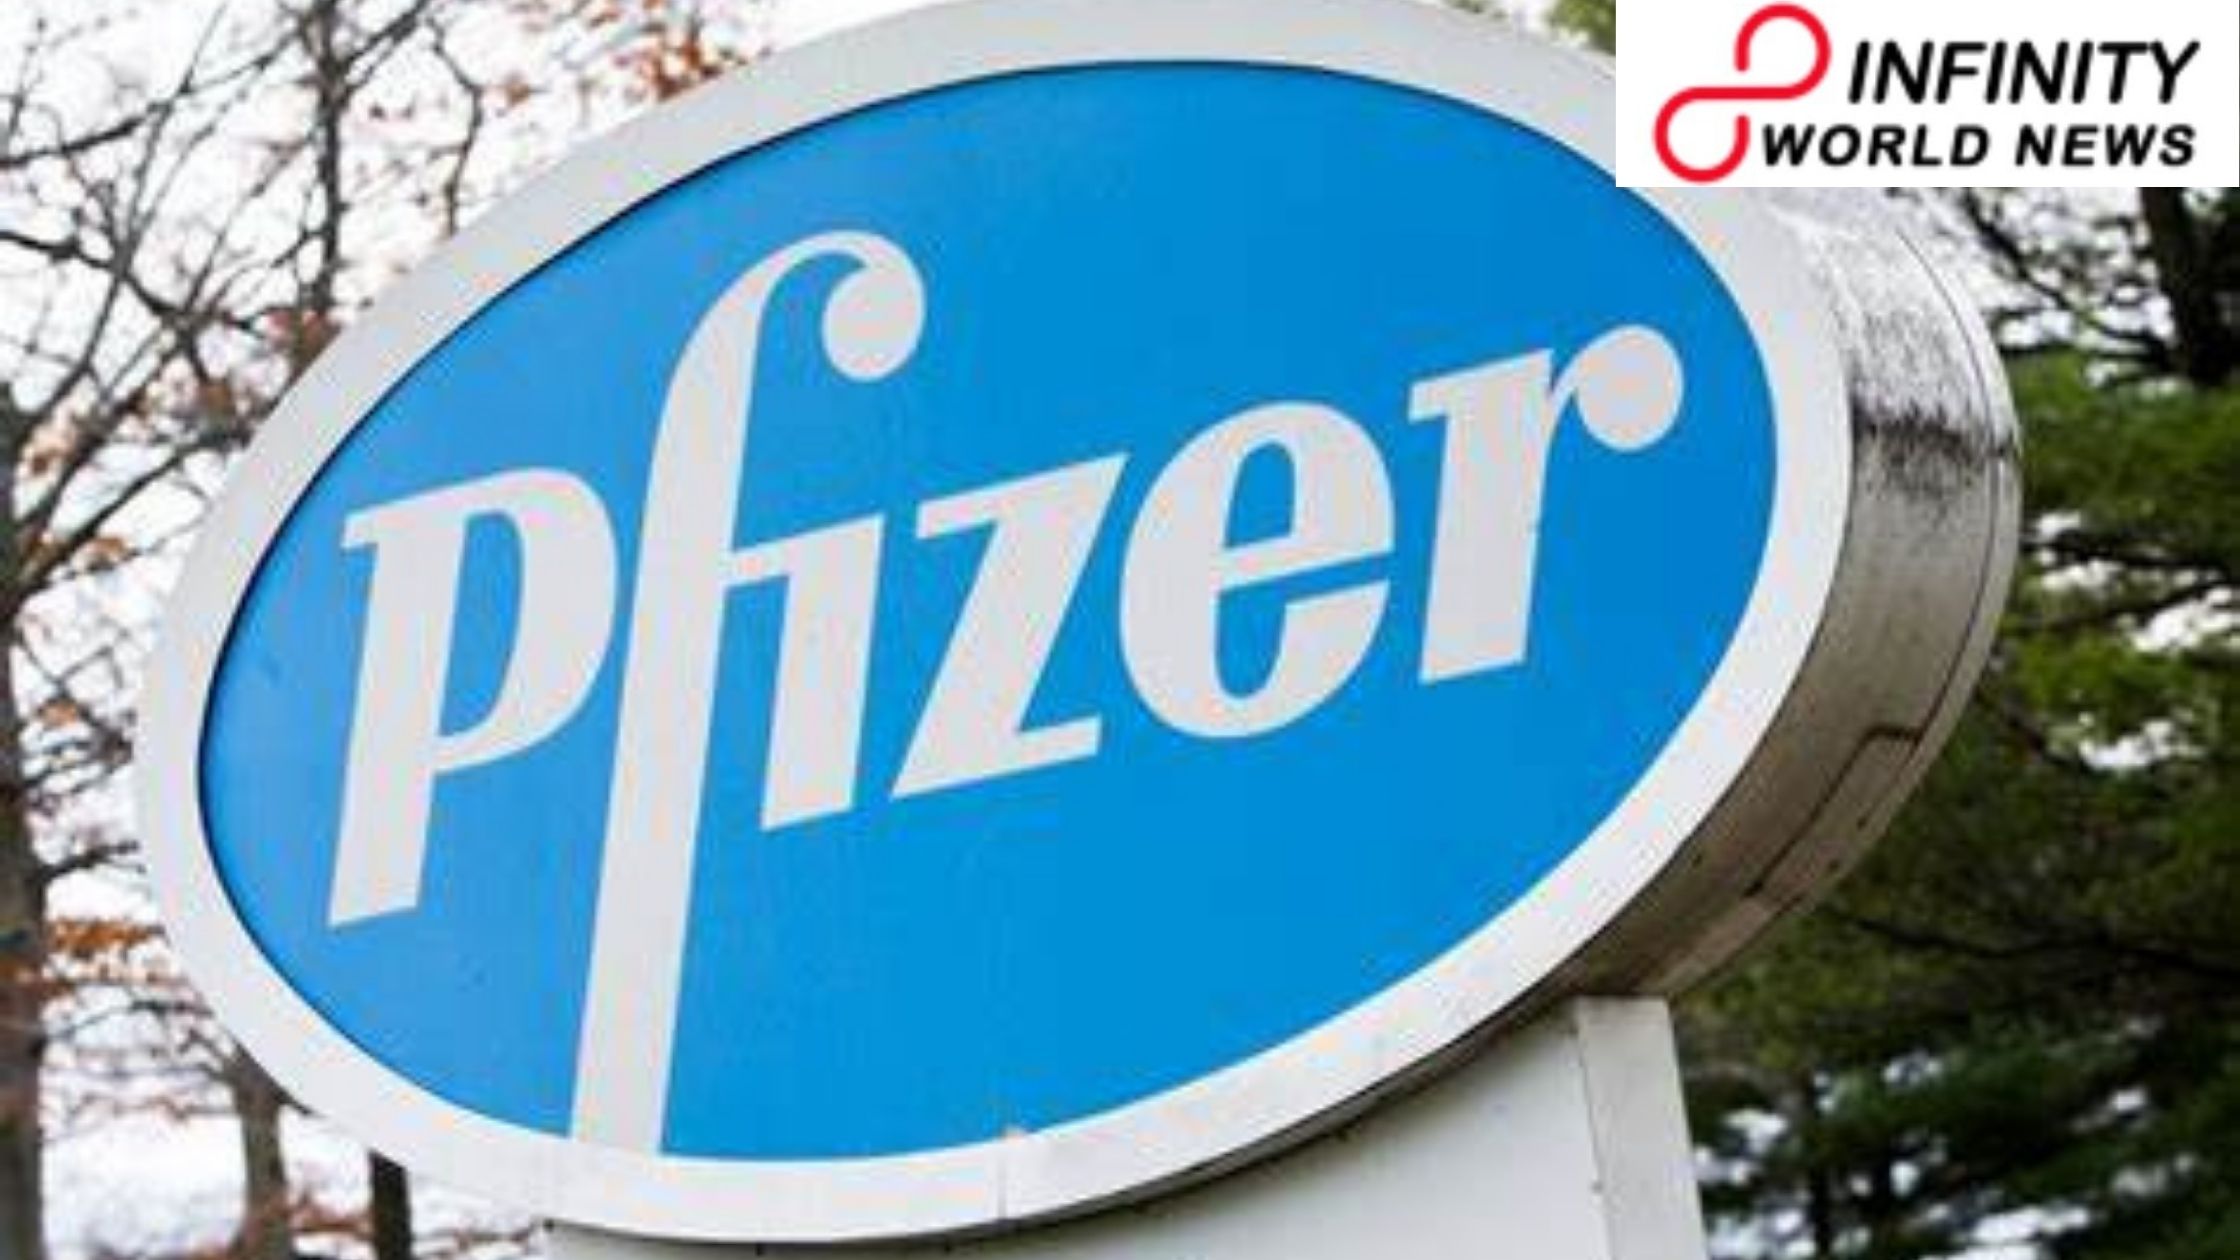 Pfizer Tries India Approval For Covid Vaccine, First To Do So